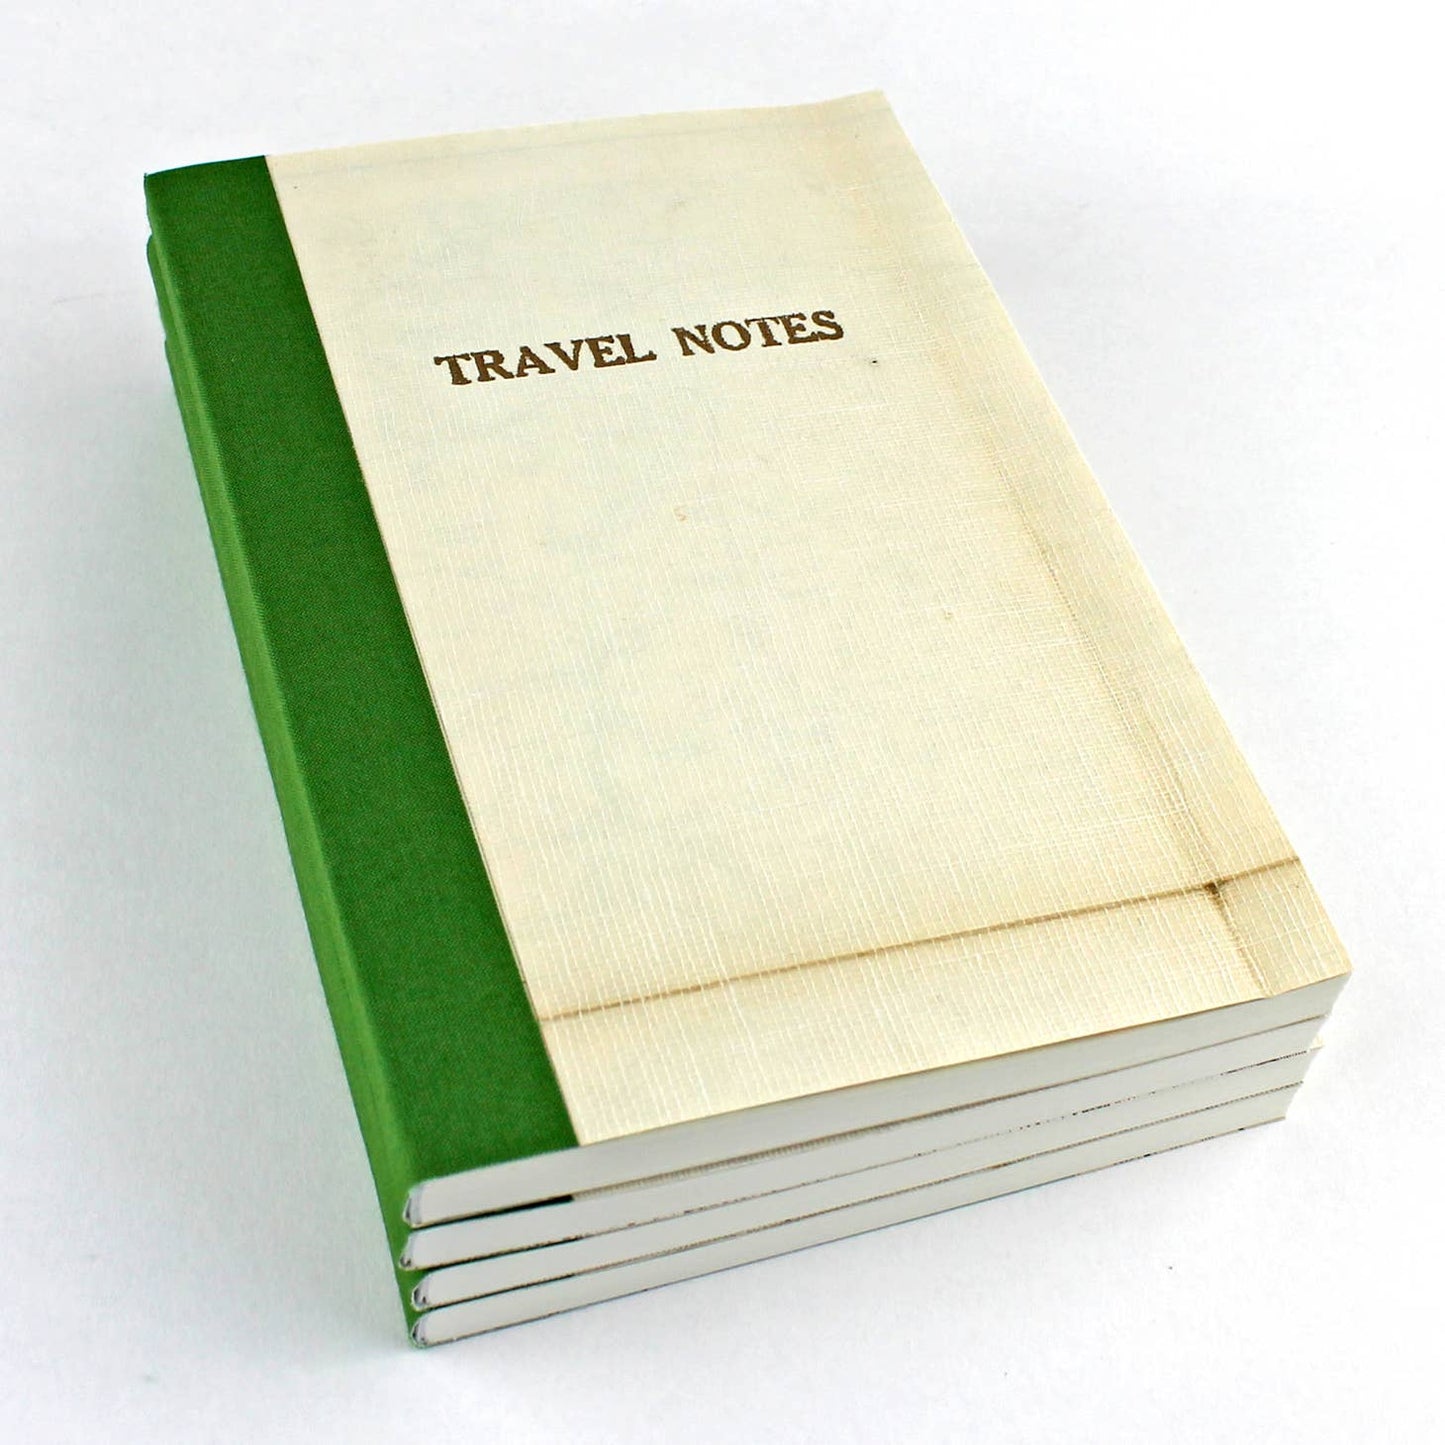 Linen Map Travel Notes with Green Binding